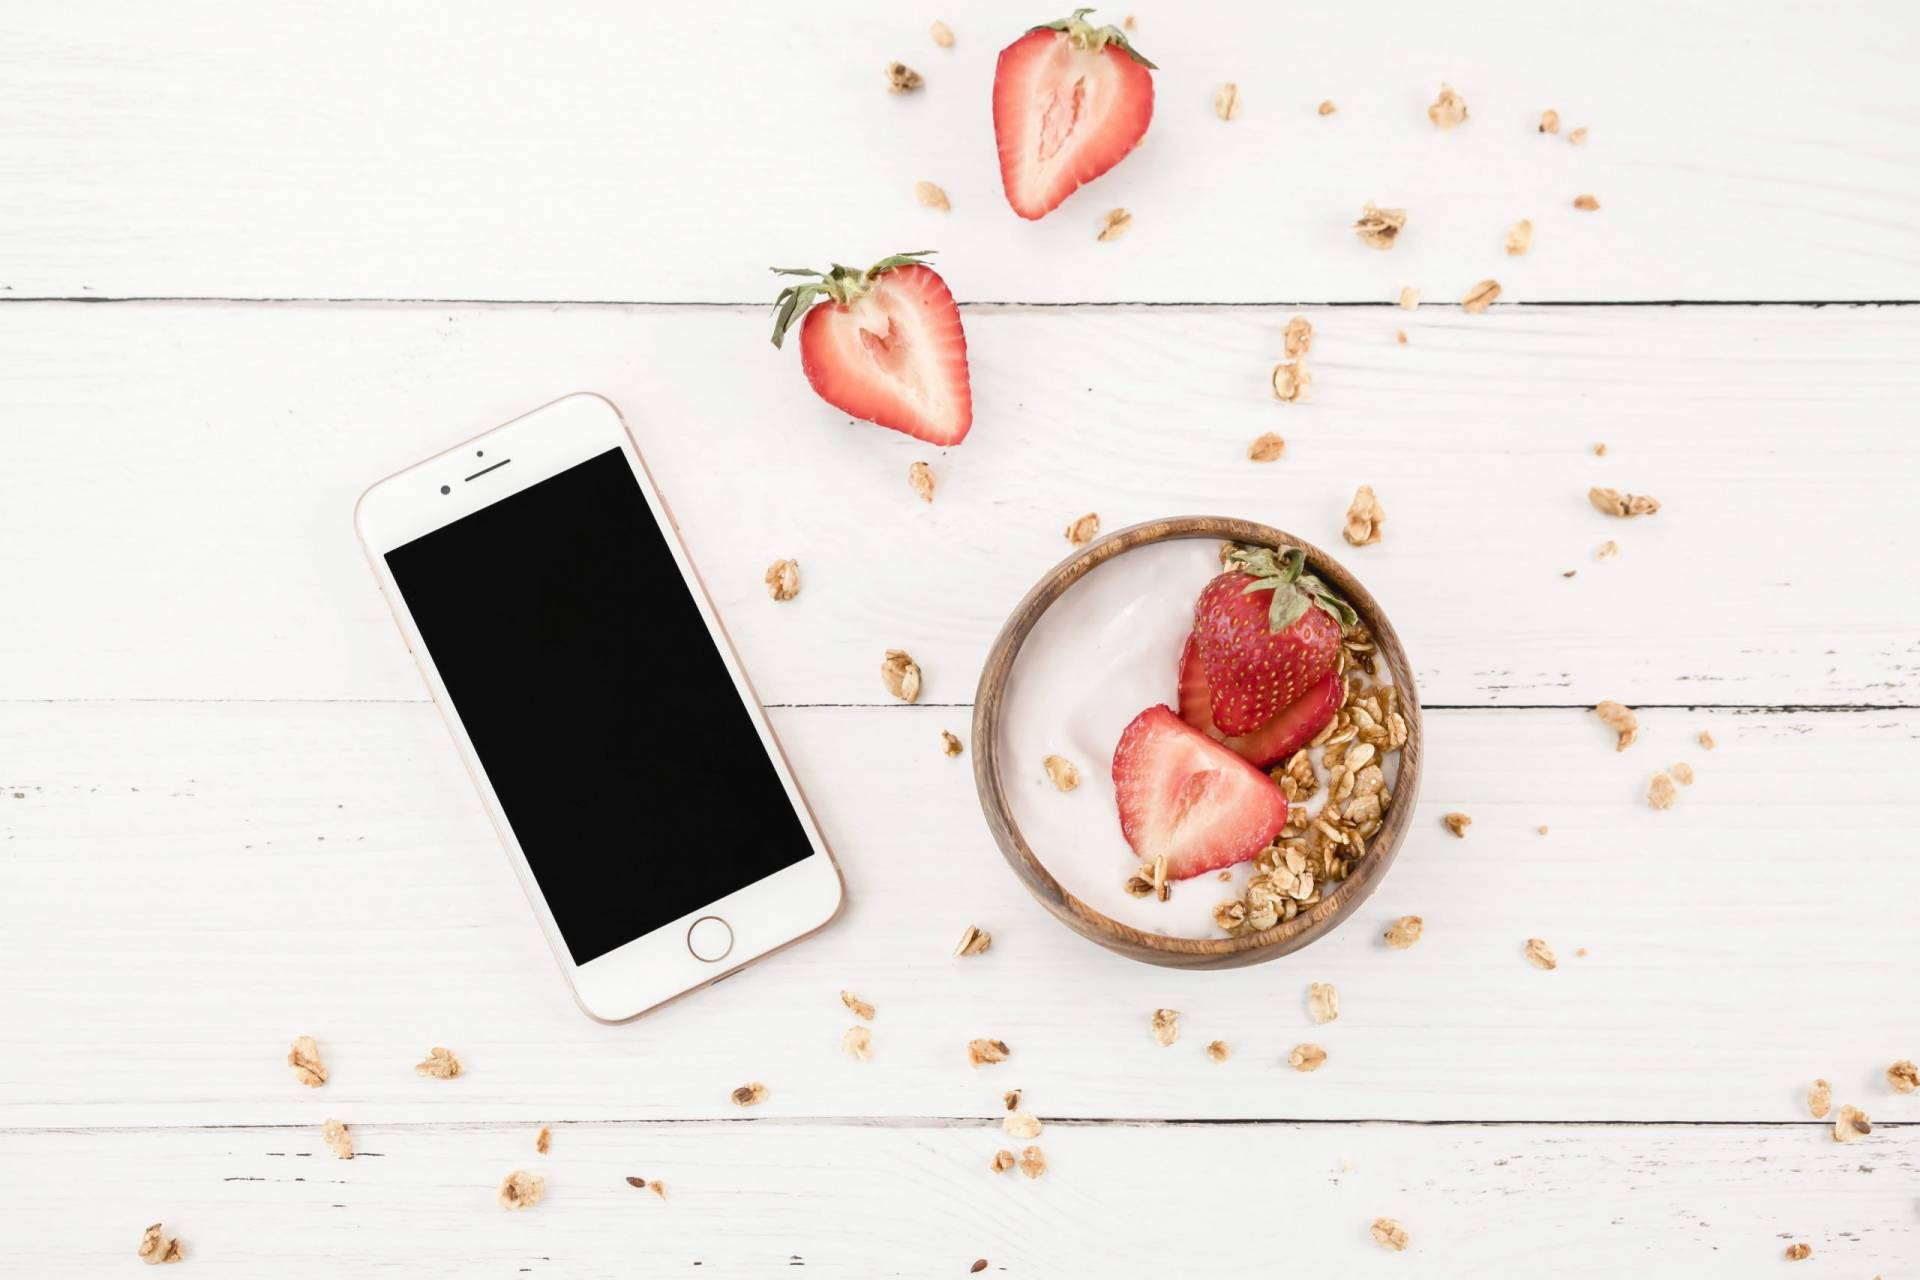 iphone and bowl with strawberries